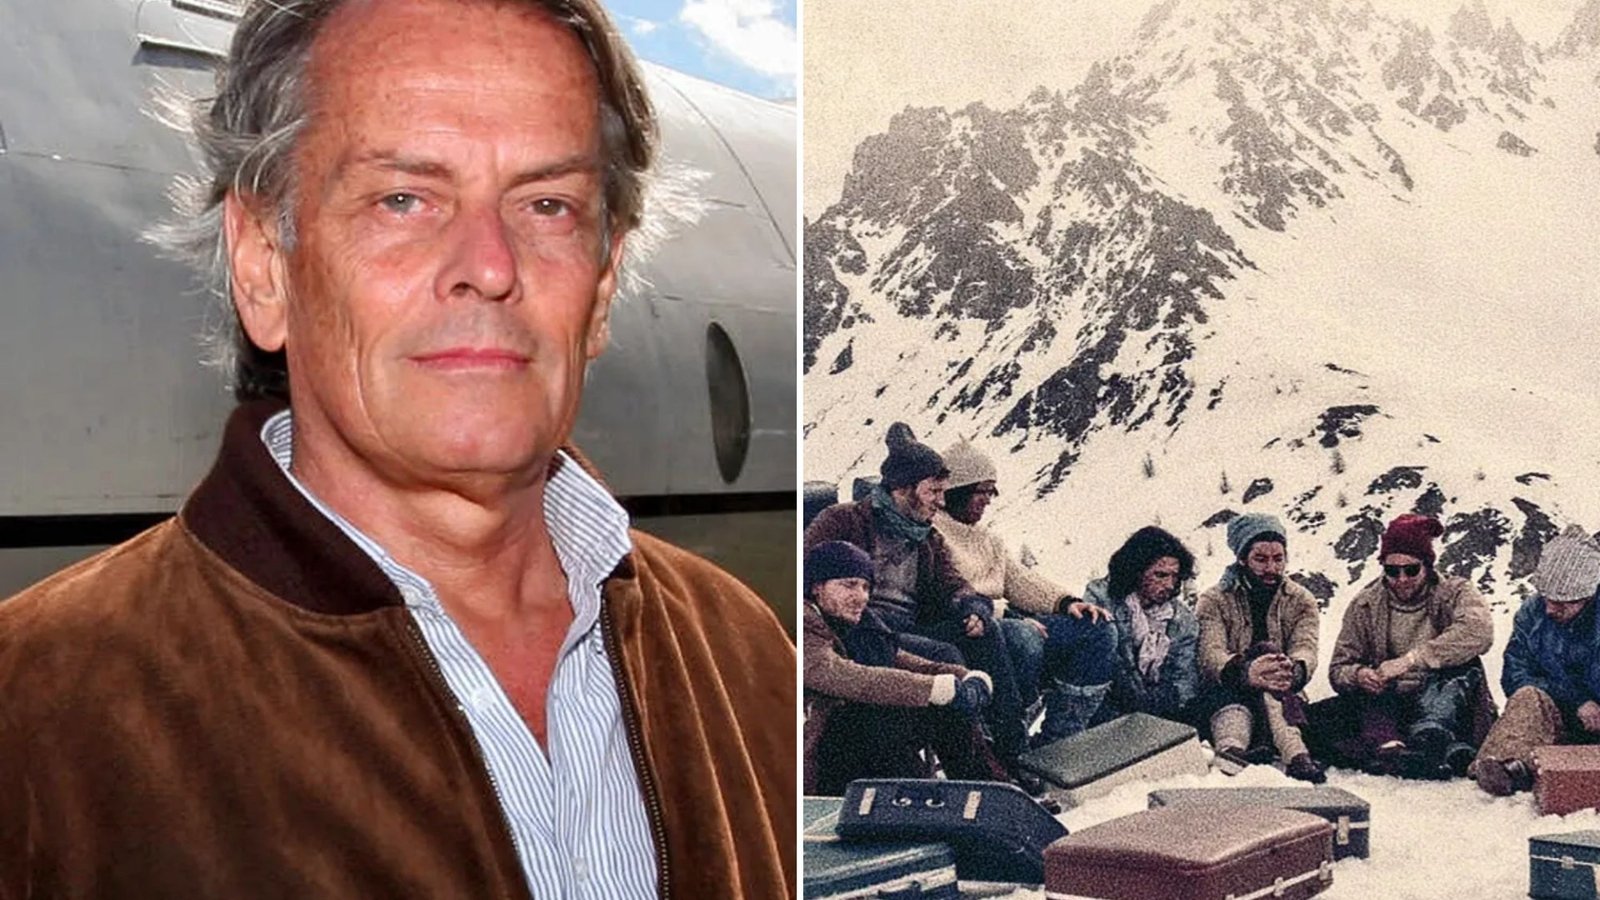 I ate my dead friends to survive Andes plane crash…I’m proud of what I did, I chose to live